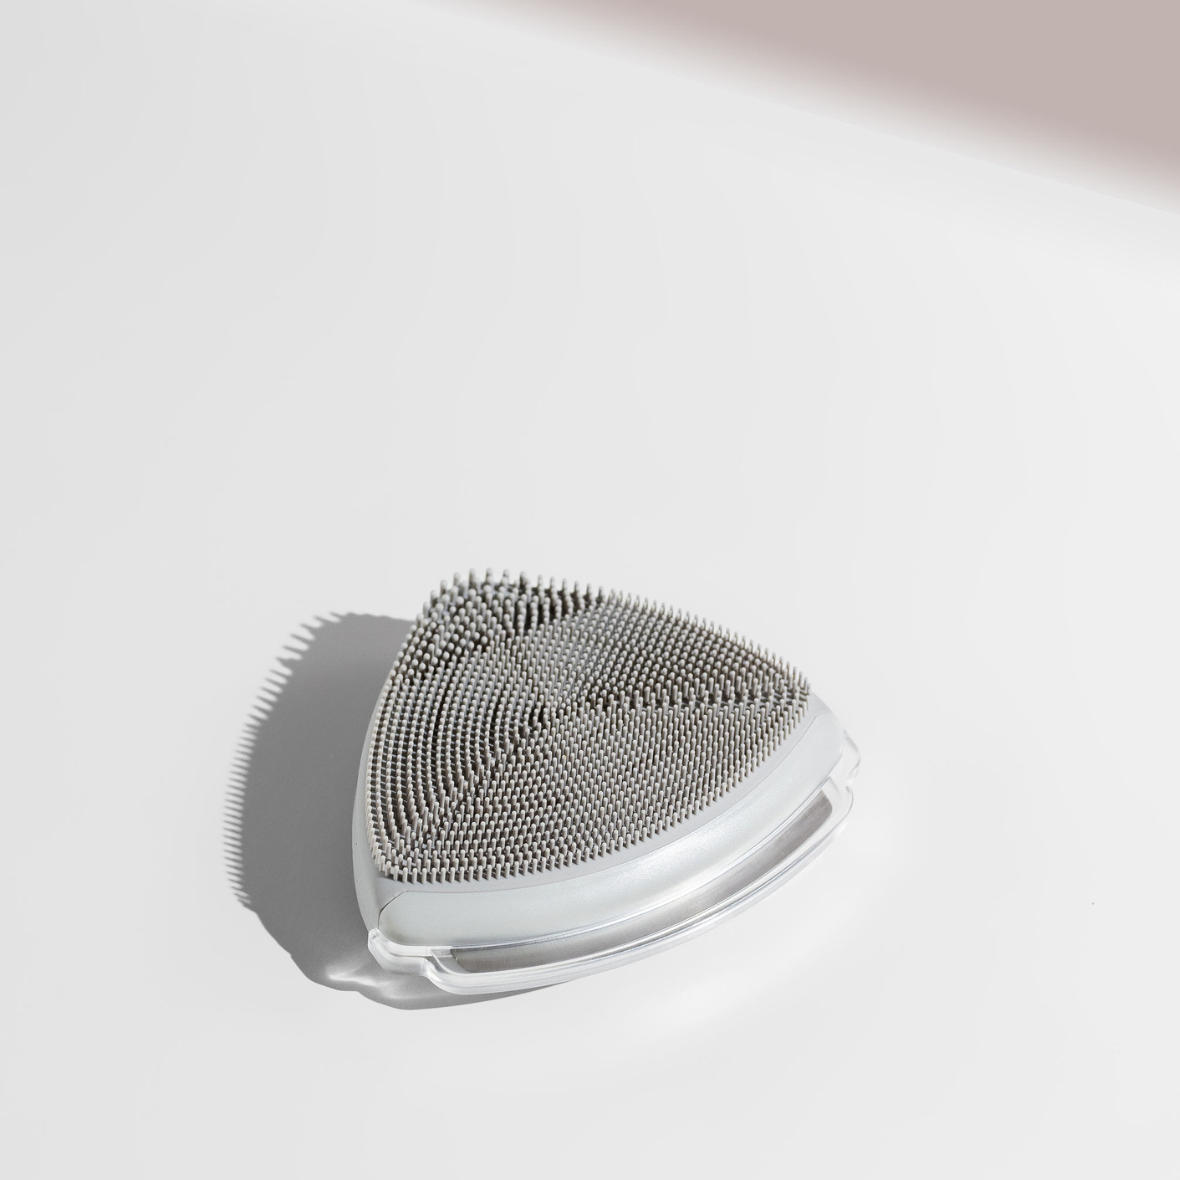 A triangular face exfoliating device with grey bristles on a white surface